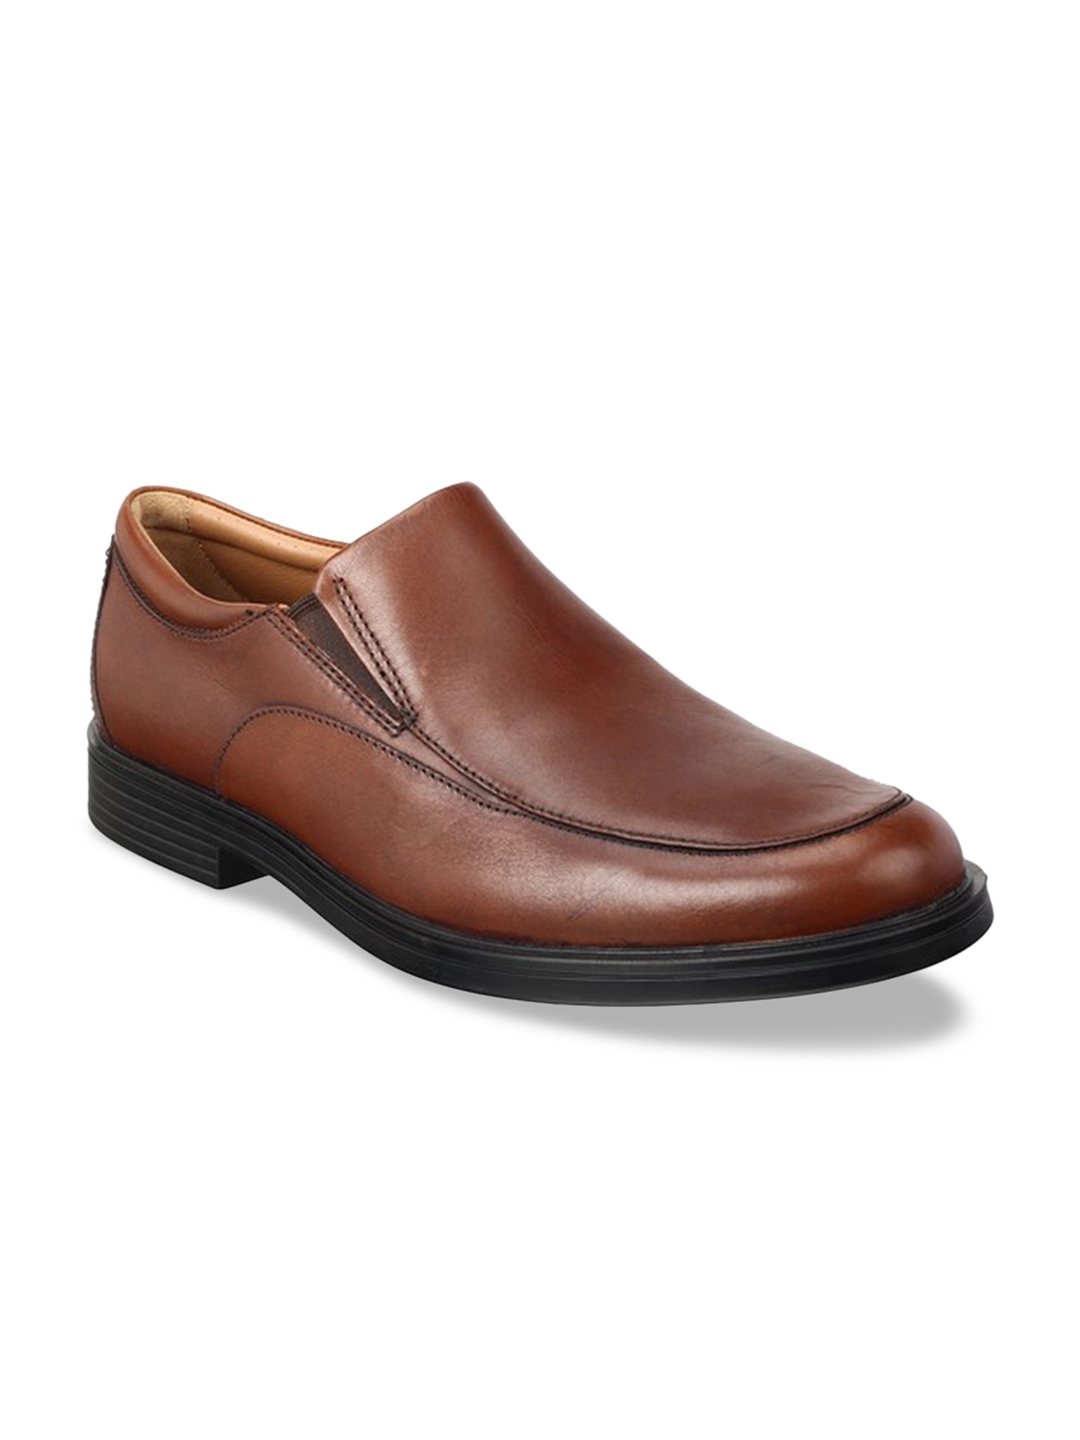 clarks tan leather shoes